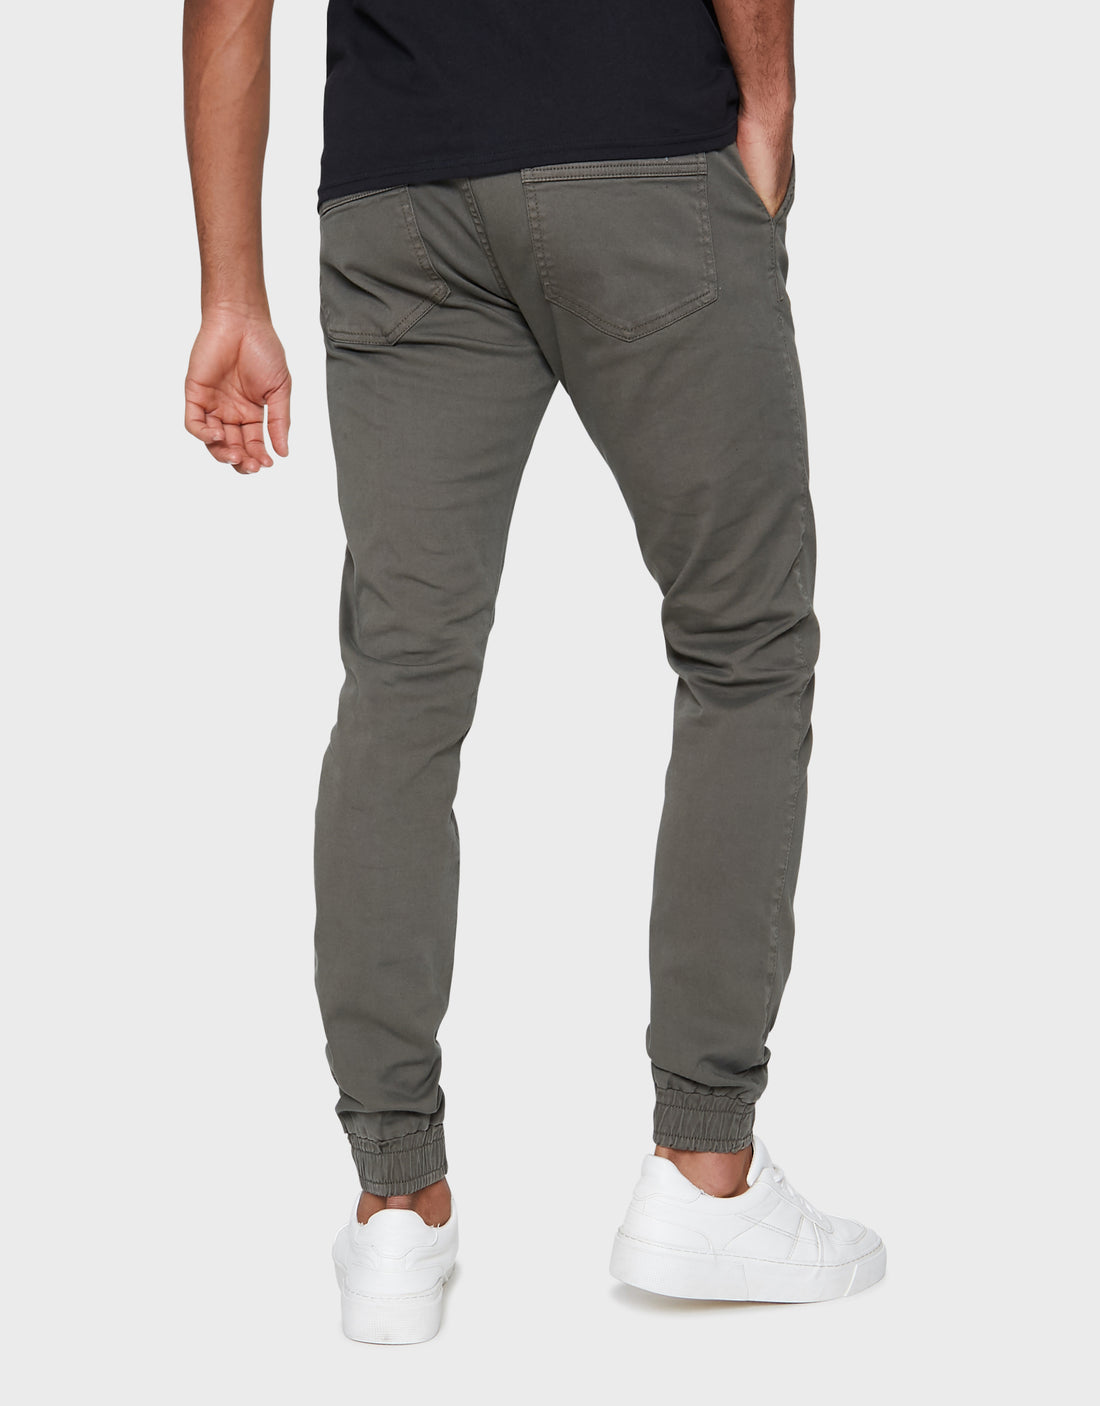 Neil Barrett Slim Fit Chino Pants with Elastic Cuff men - Glamood Outlet